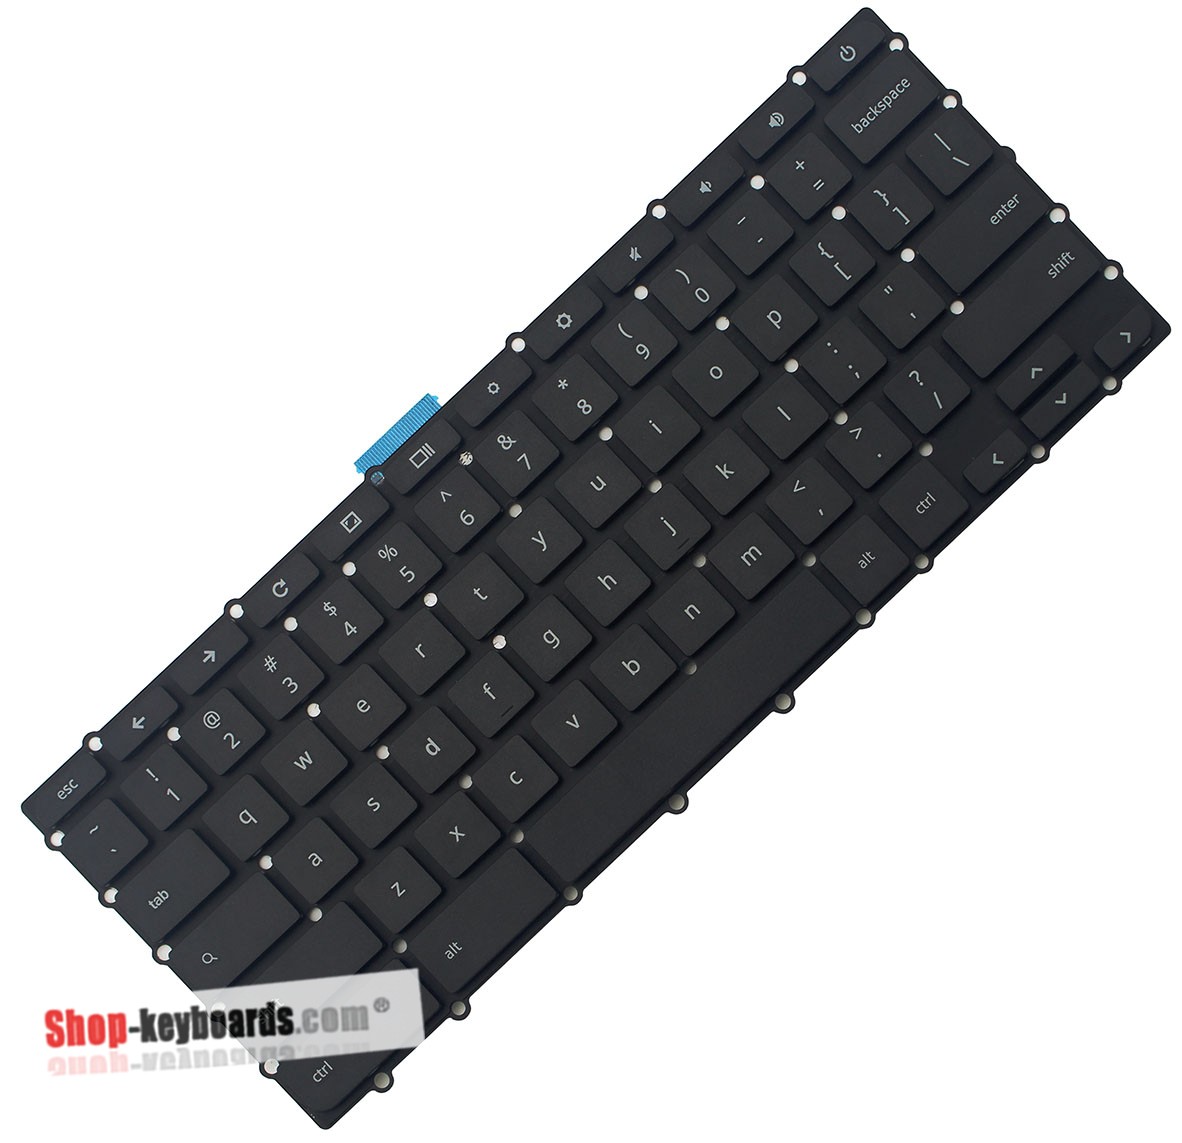 Acer CB3-131-C8D2  Keyboard replacement